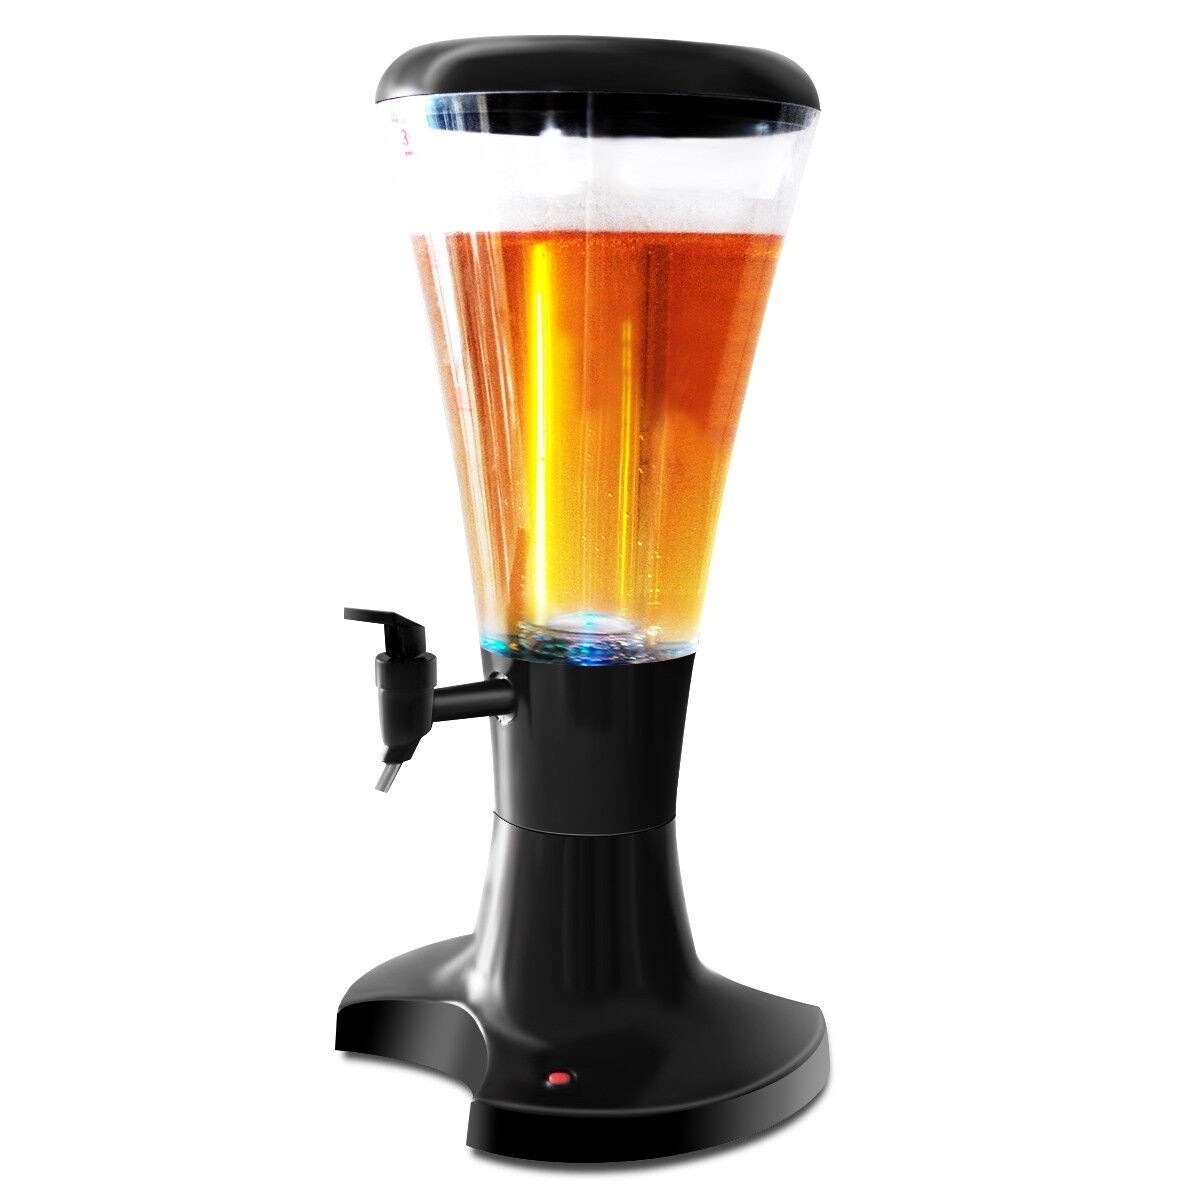 https://ak1.ostkcdn.com/images/products/is/images/direct/7a0c8aa13131e348da2769e633065bdd6f5f062d/3L-Draft-Beer-Tower-Dispenser-with-LED-Lights.jpg